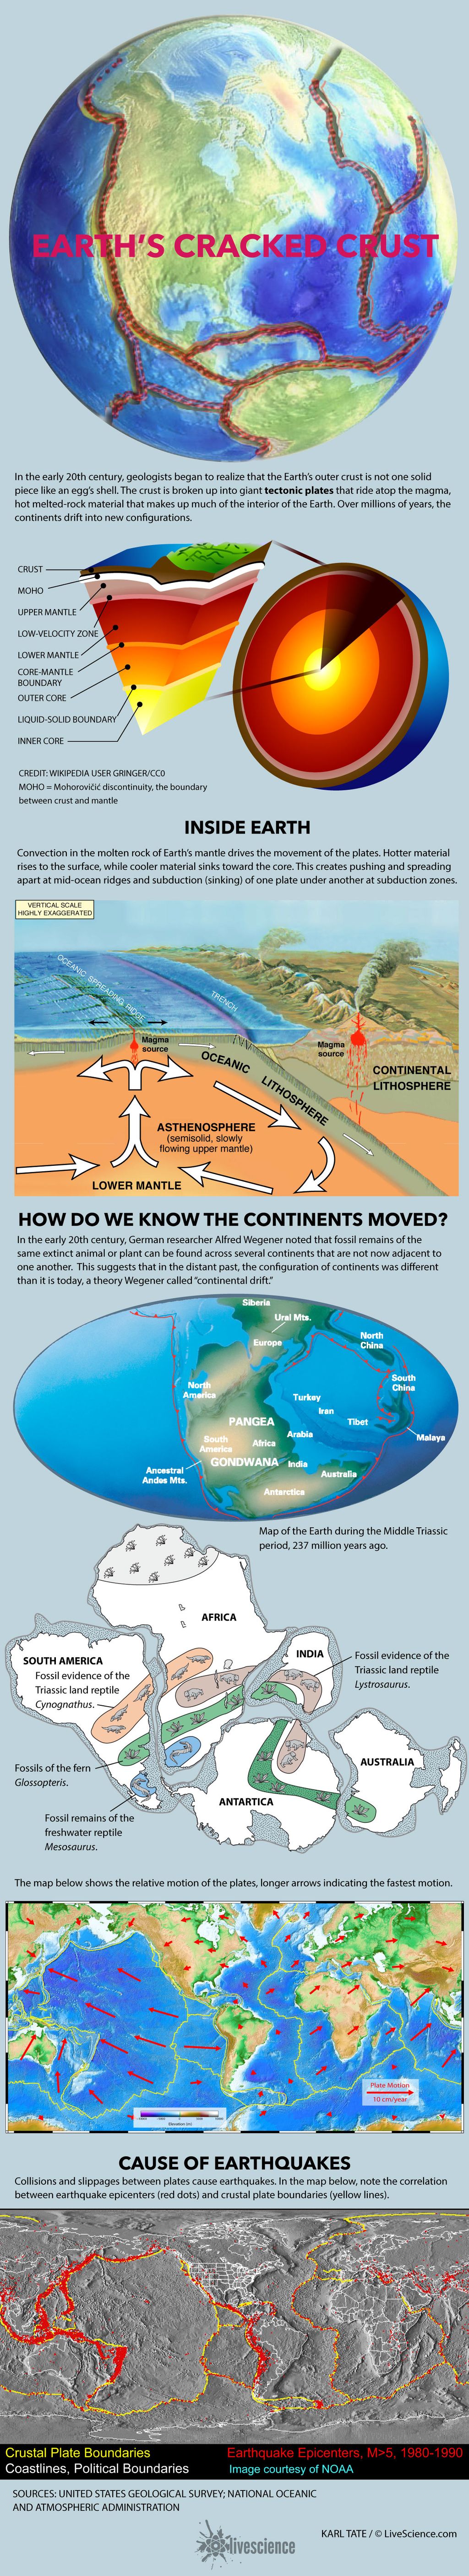 continental drift hypothesis and the theory of plate tectonics